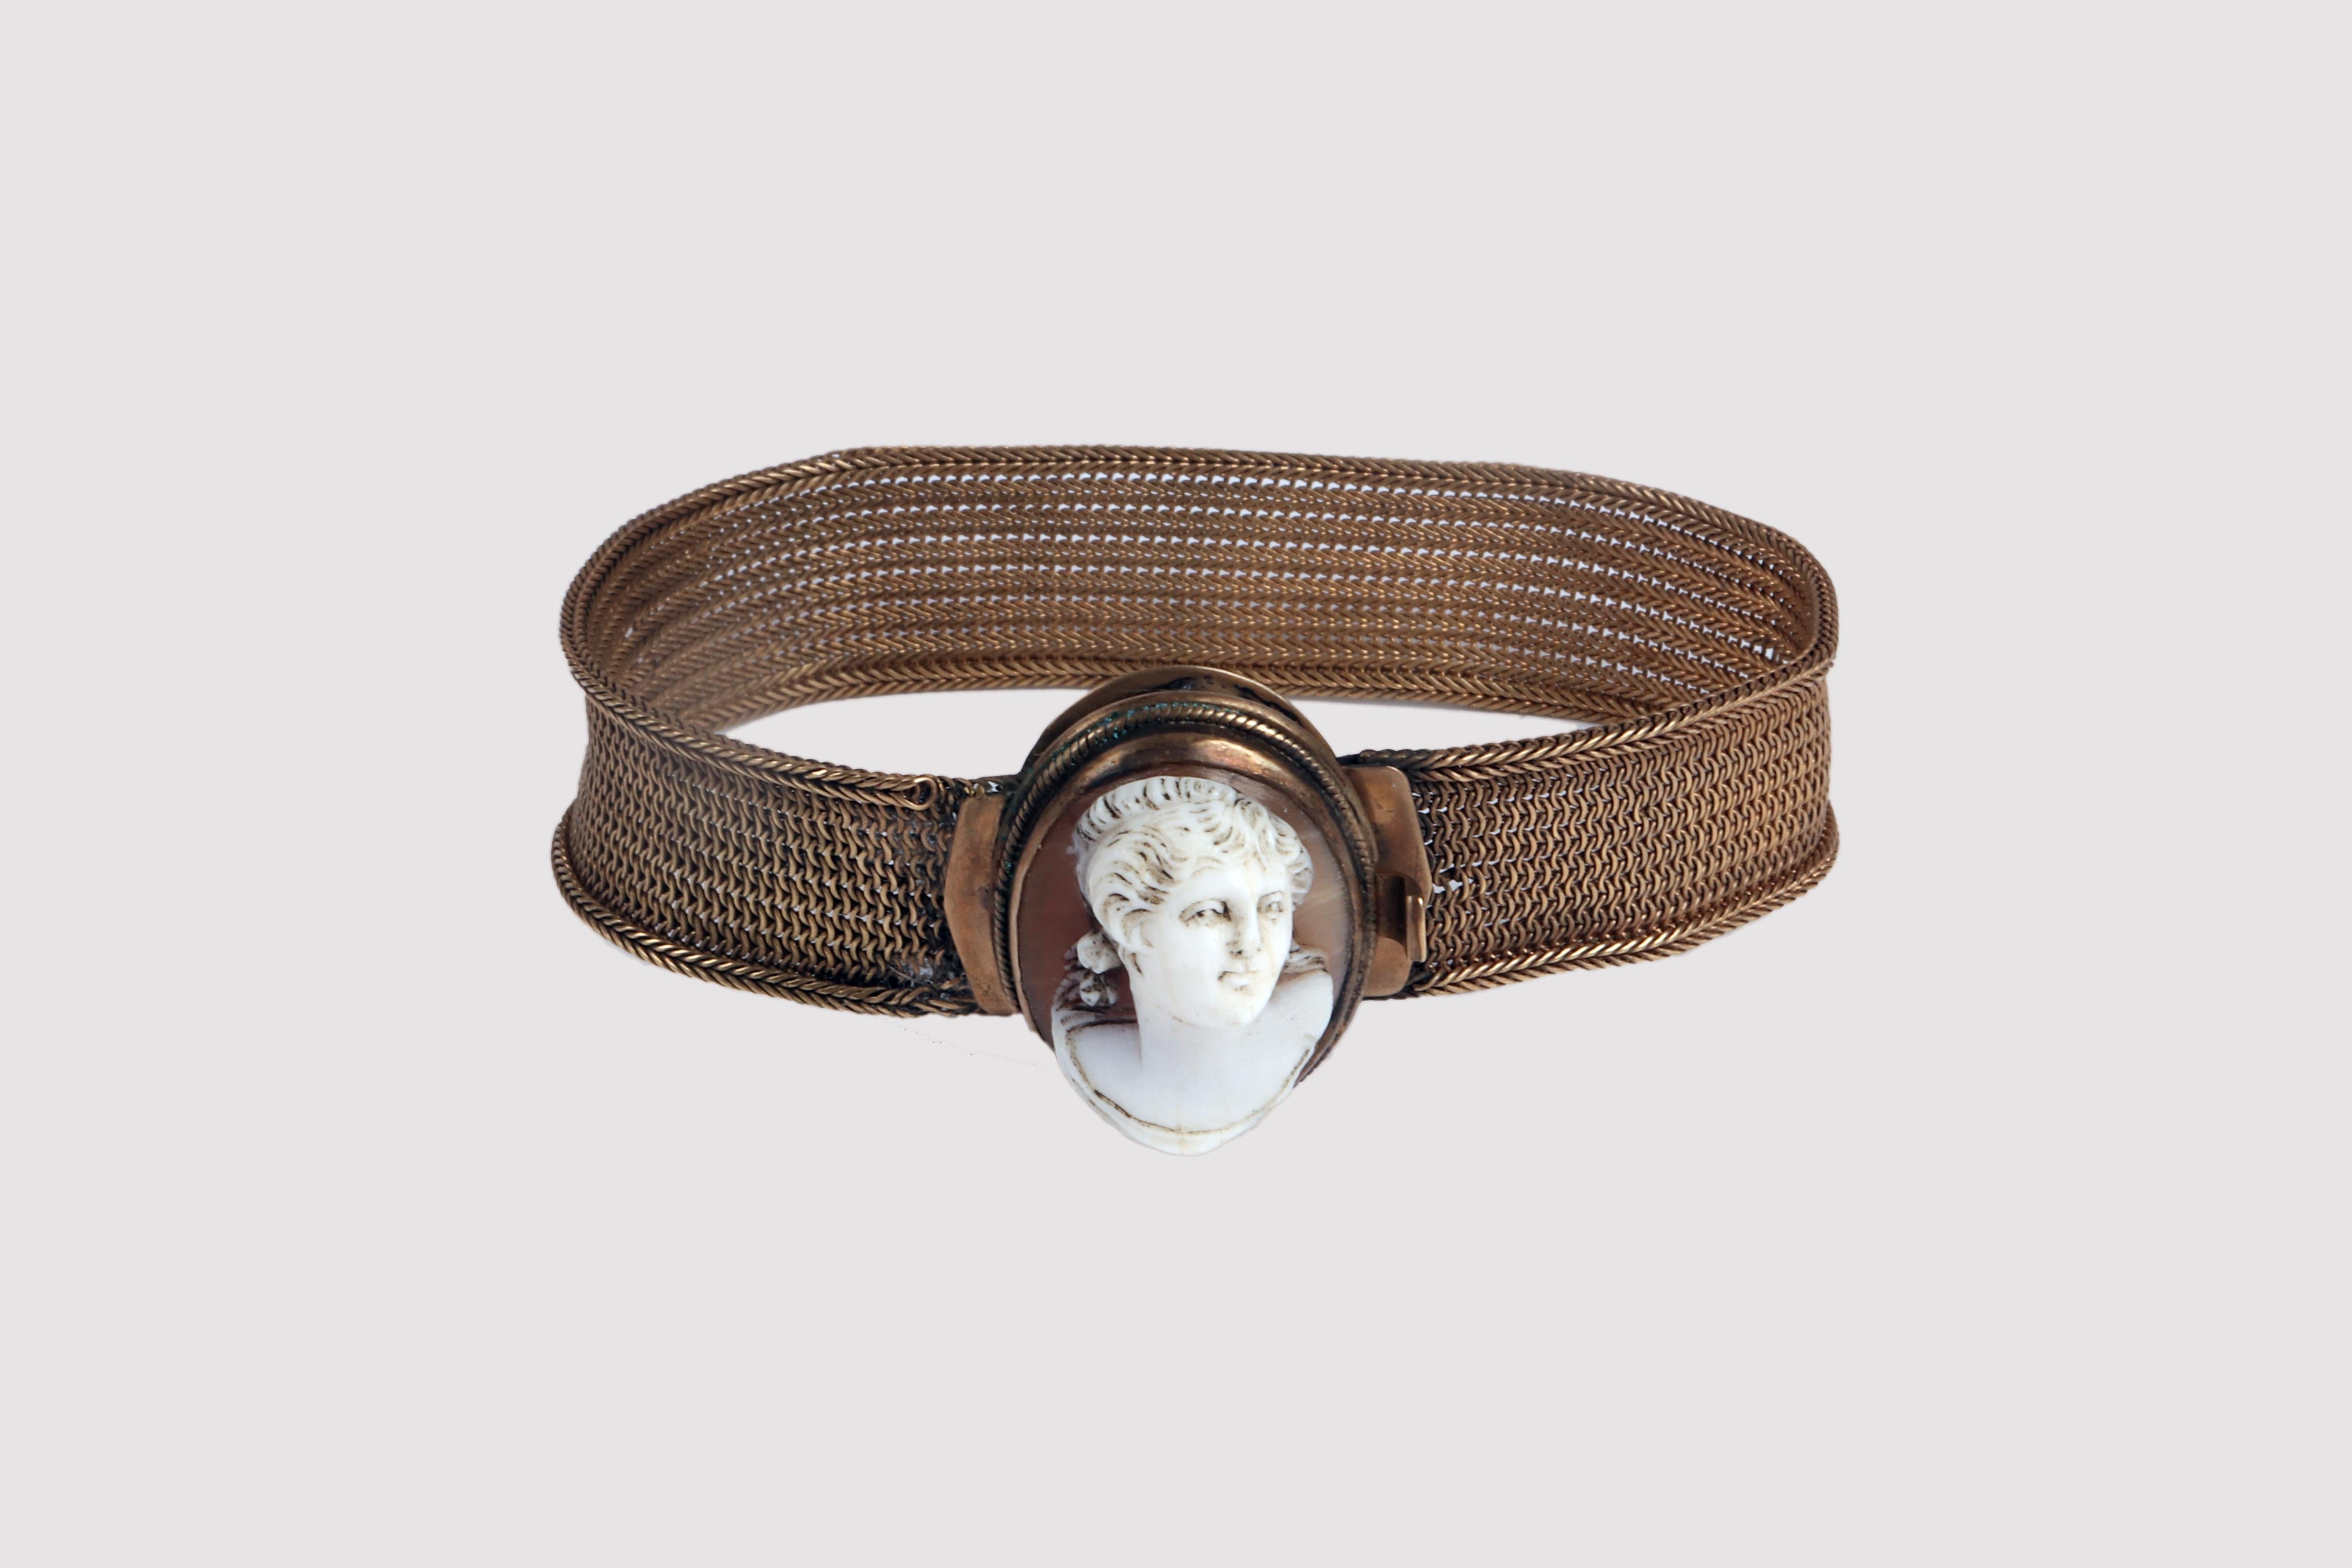 Victorian era bracelet with shell cameo. The bracelet is made with a band of woven 12K gold wire. The edges are reinforced with a continuous herringbone pattern. The clasp consists of a gold oval corded in filigree which sets a cameo depicting a